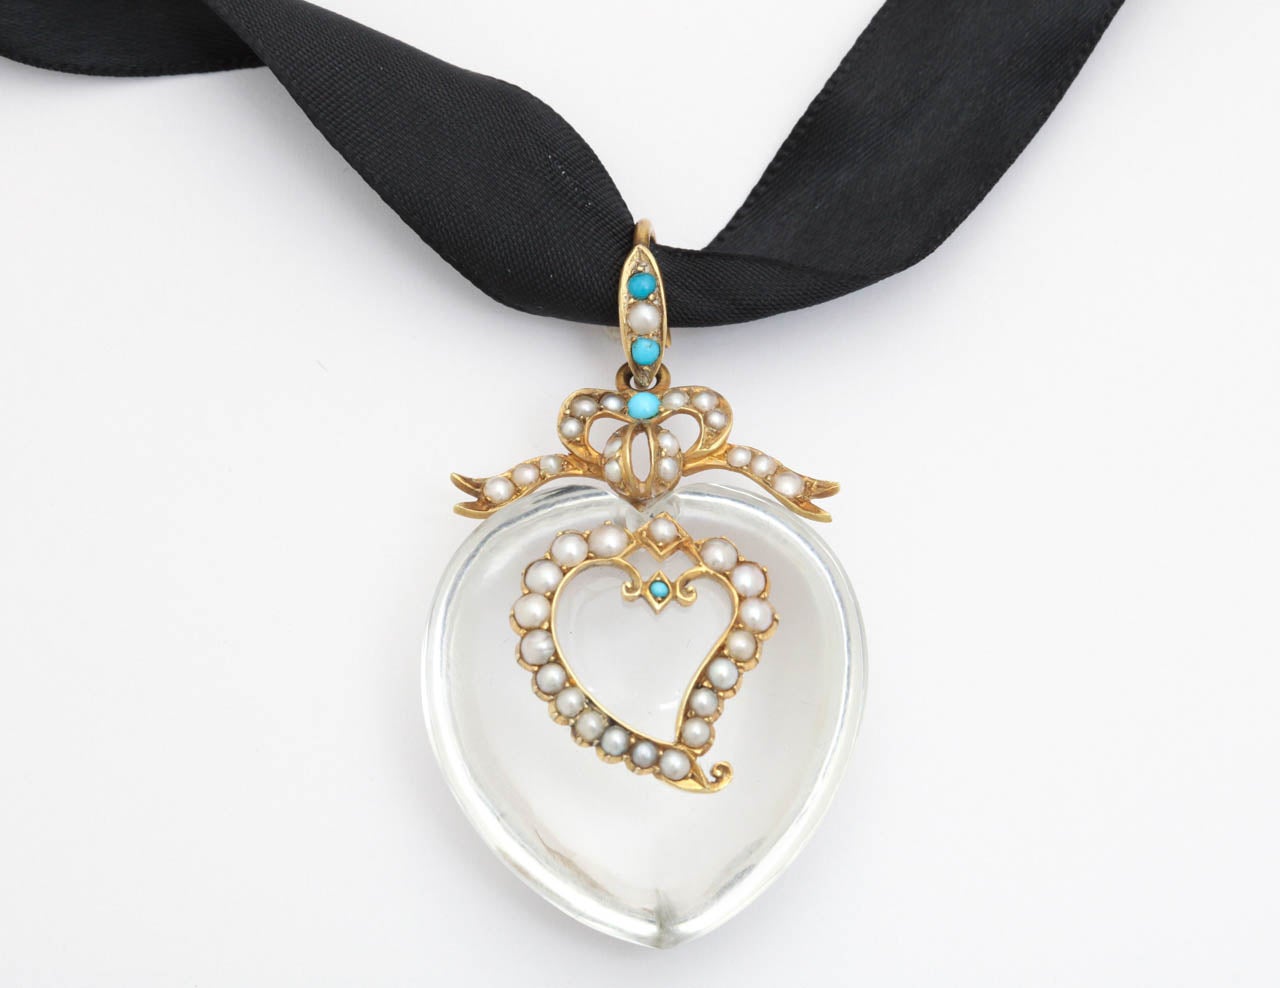 A fulsome rock crystal, clear and pure, holds a witch's heart of natural pearls. At its center sits a dot of turquoise that hypnotically holds the eye. The bale forms a flowing gold bow with its ribbons sitting atop the crystal like a crown. This